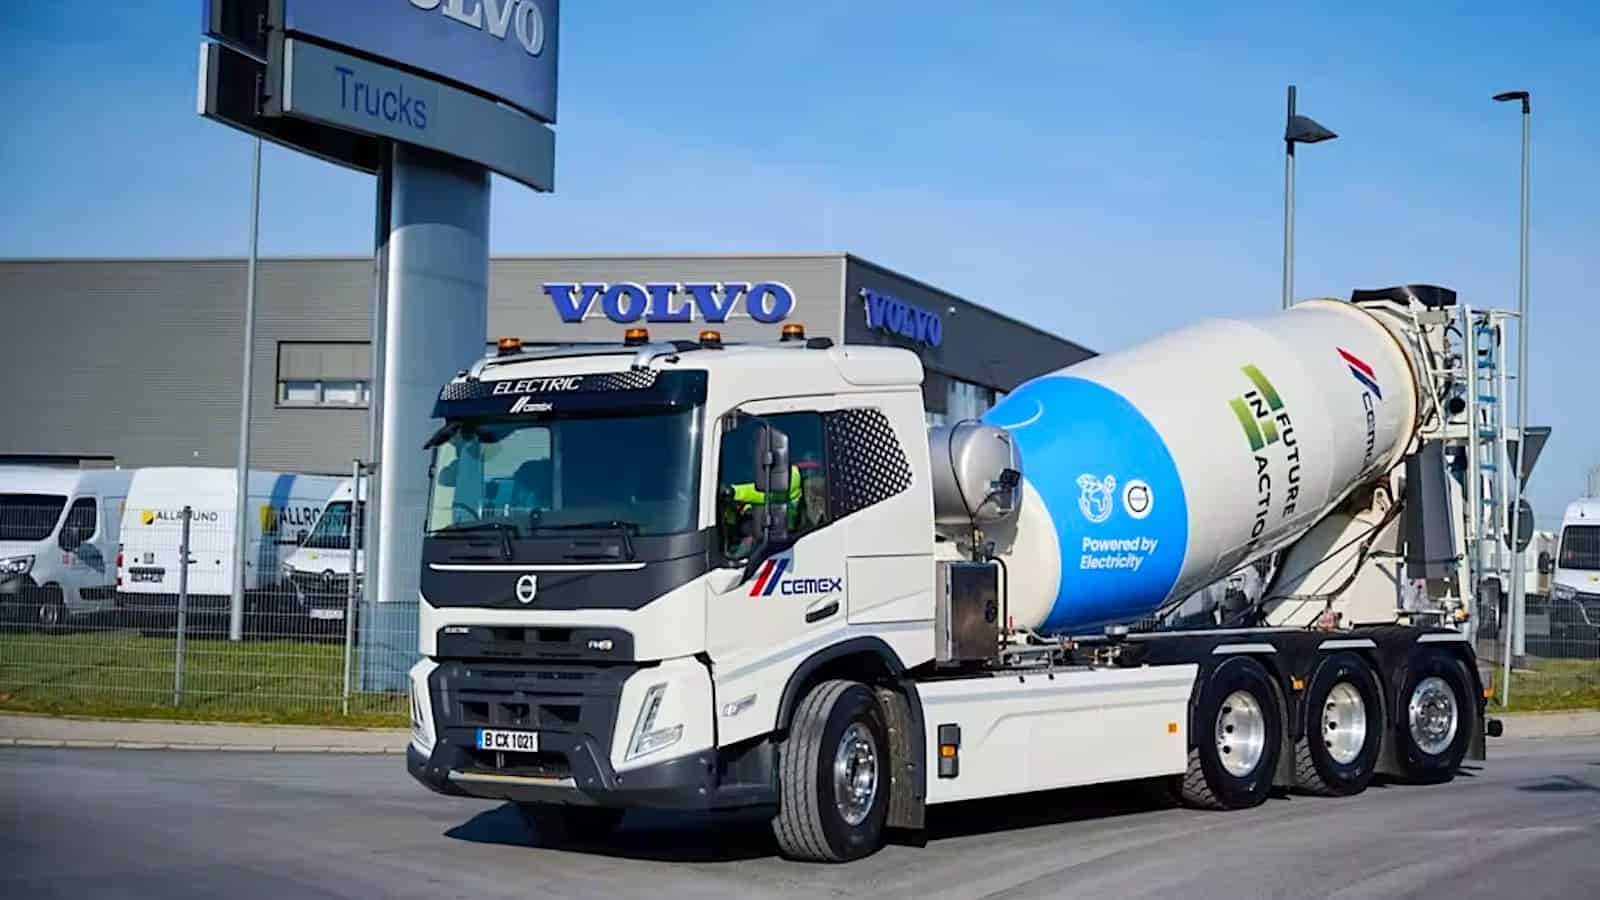 Volvo looks to clean up construction with electric concrete mixer truck